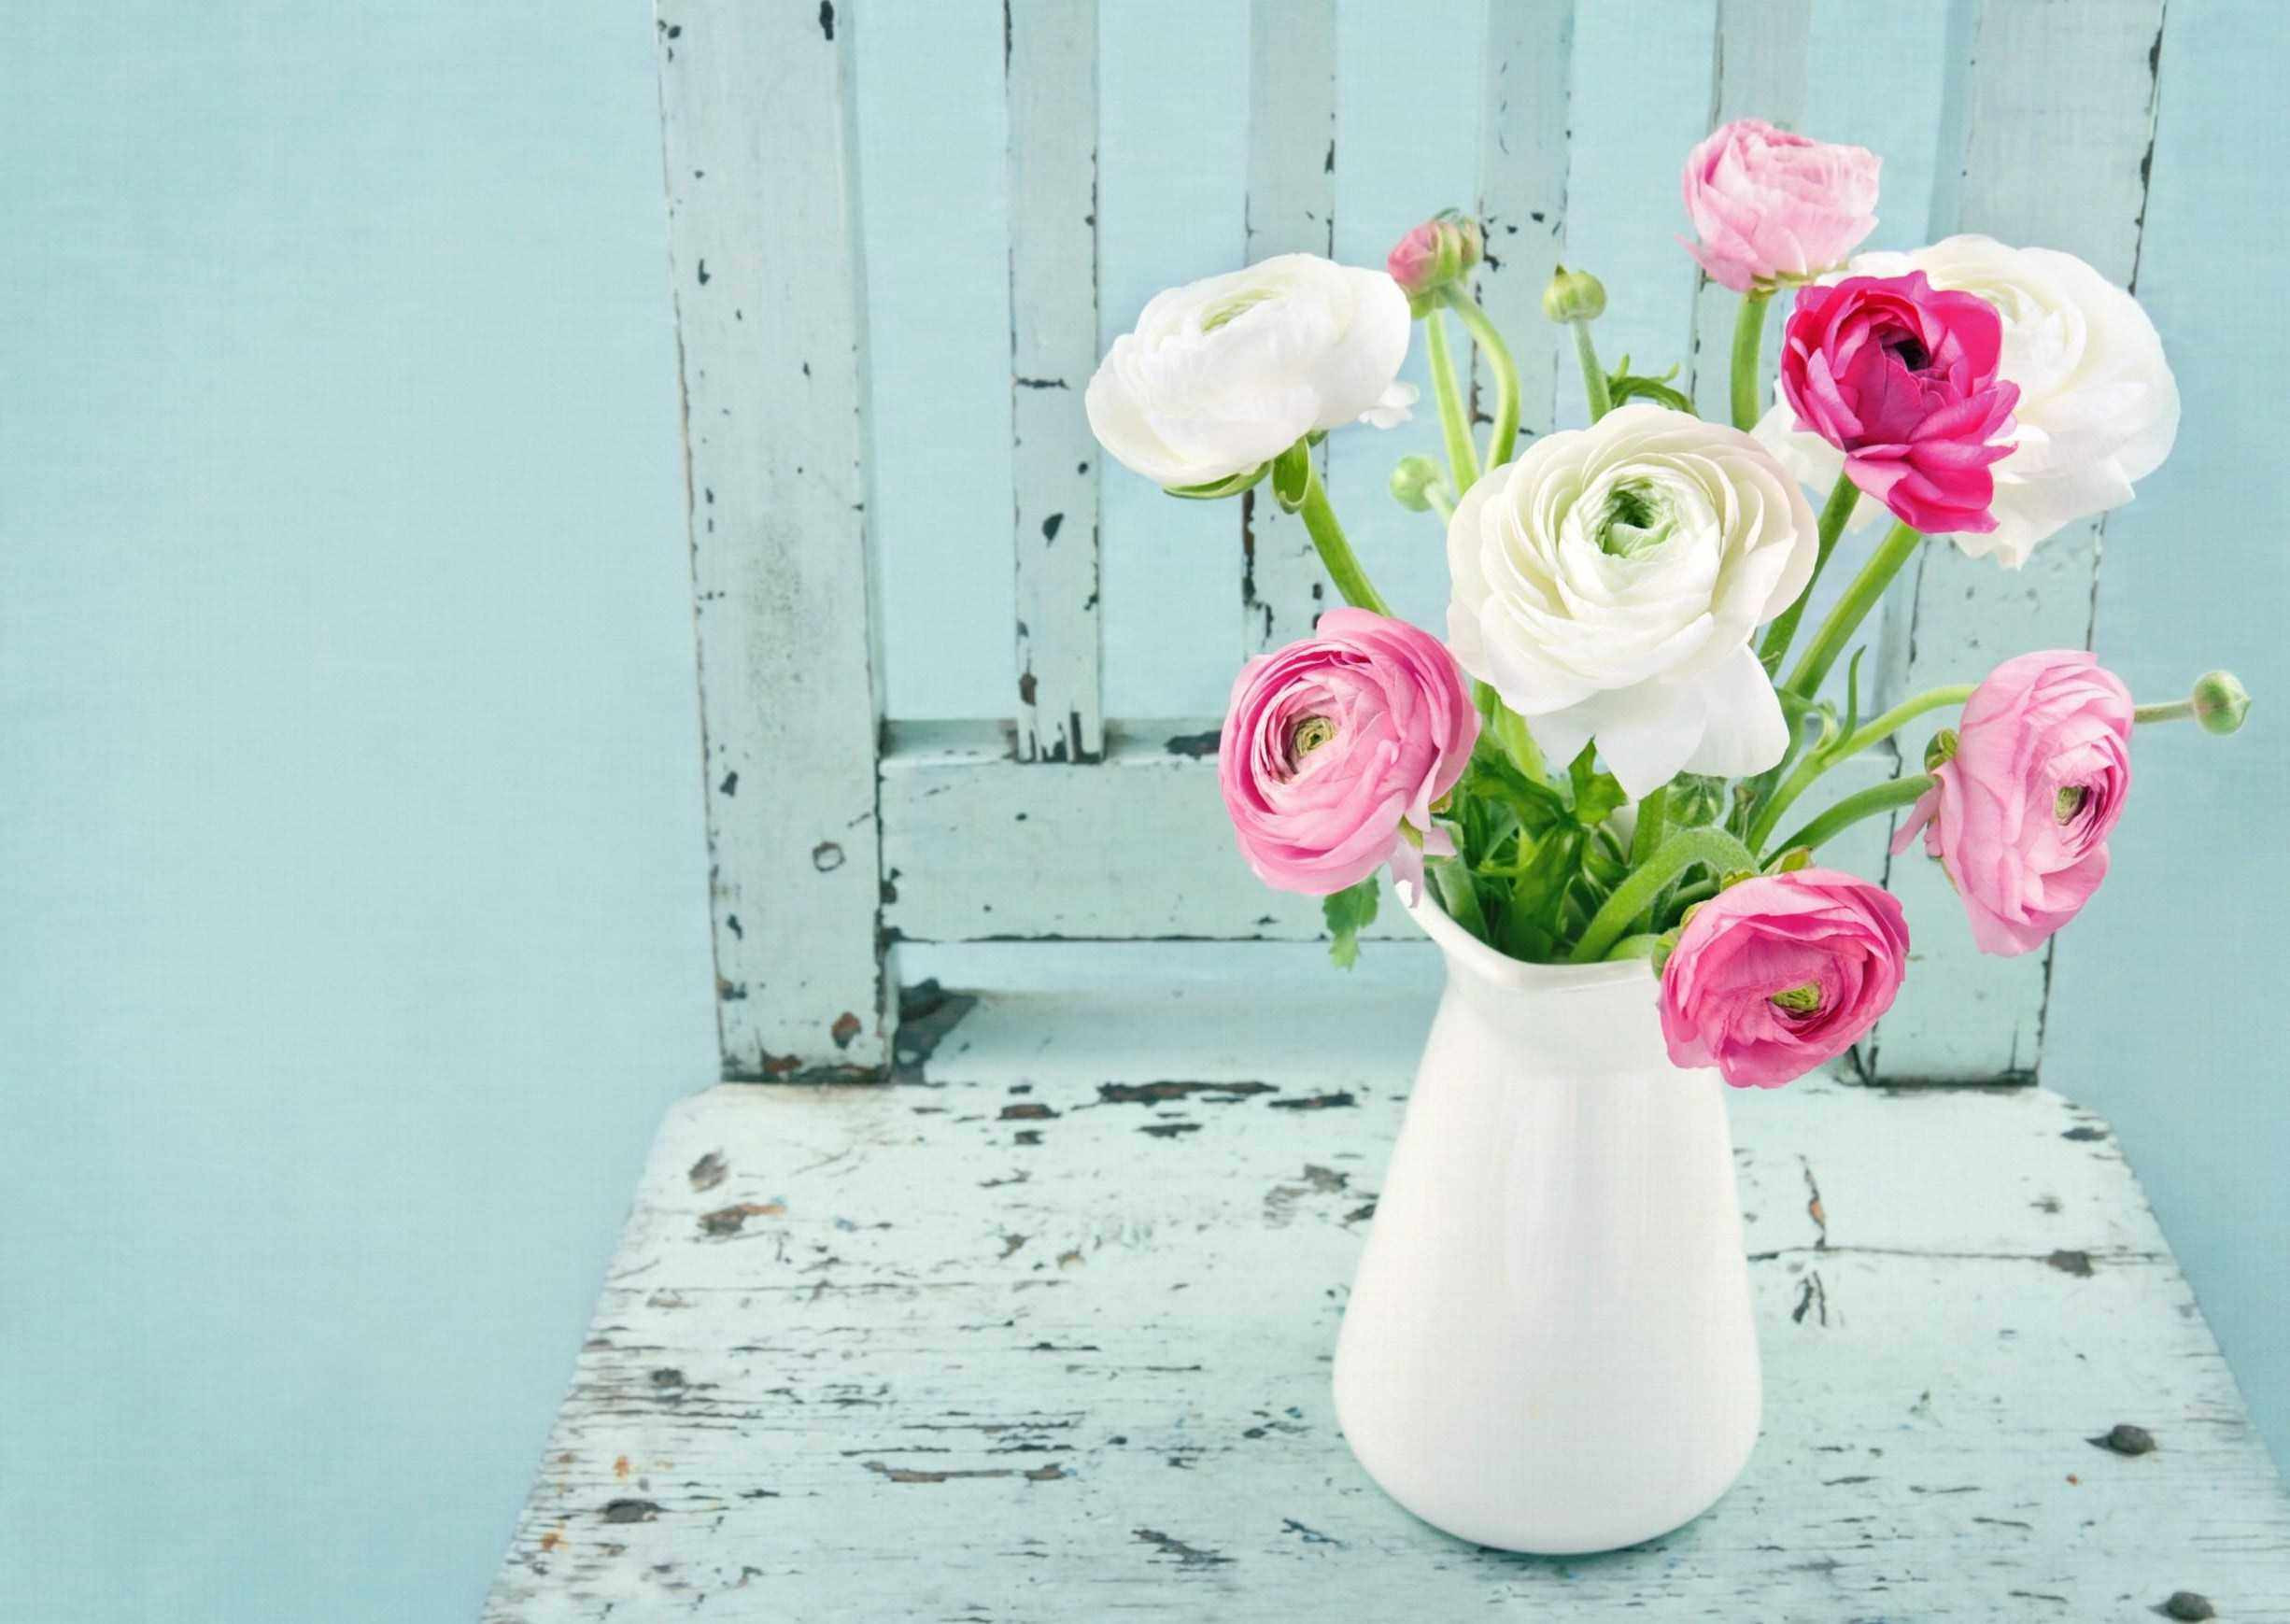 29 Unique Pictures Of Roses In A Vase 2024 free download pictures of roses in a vase of flowers new orleans fresh living room roses in a vase new clear vase with flowers new orleans fresh living room roses in a vase new clear vase 0d tags amazing 